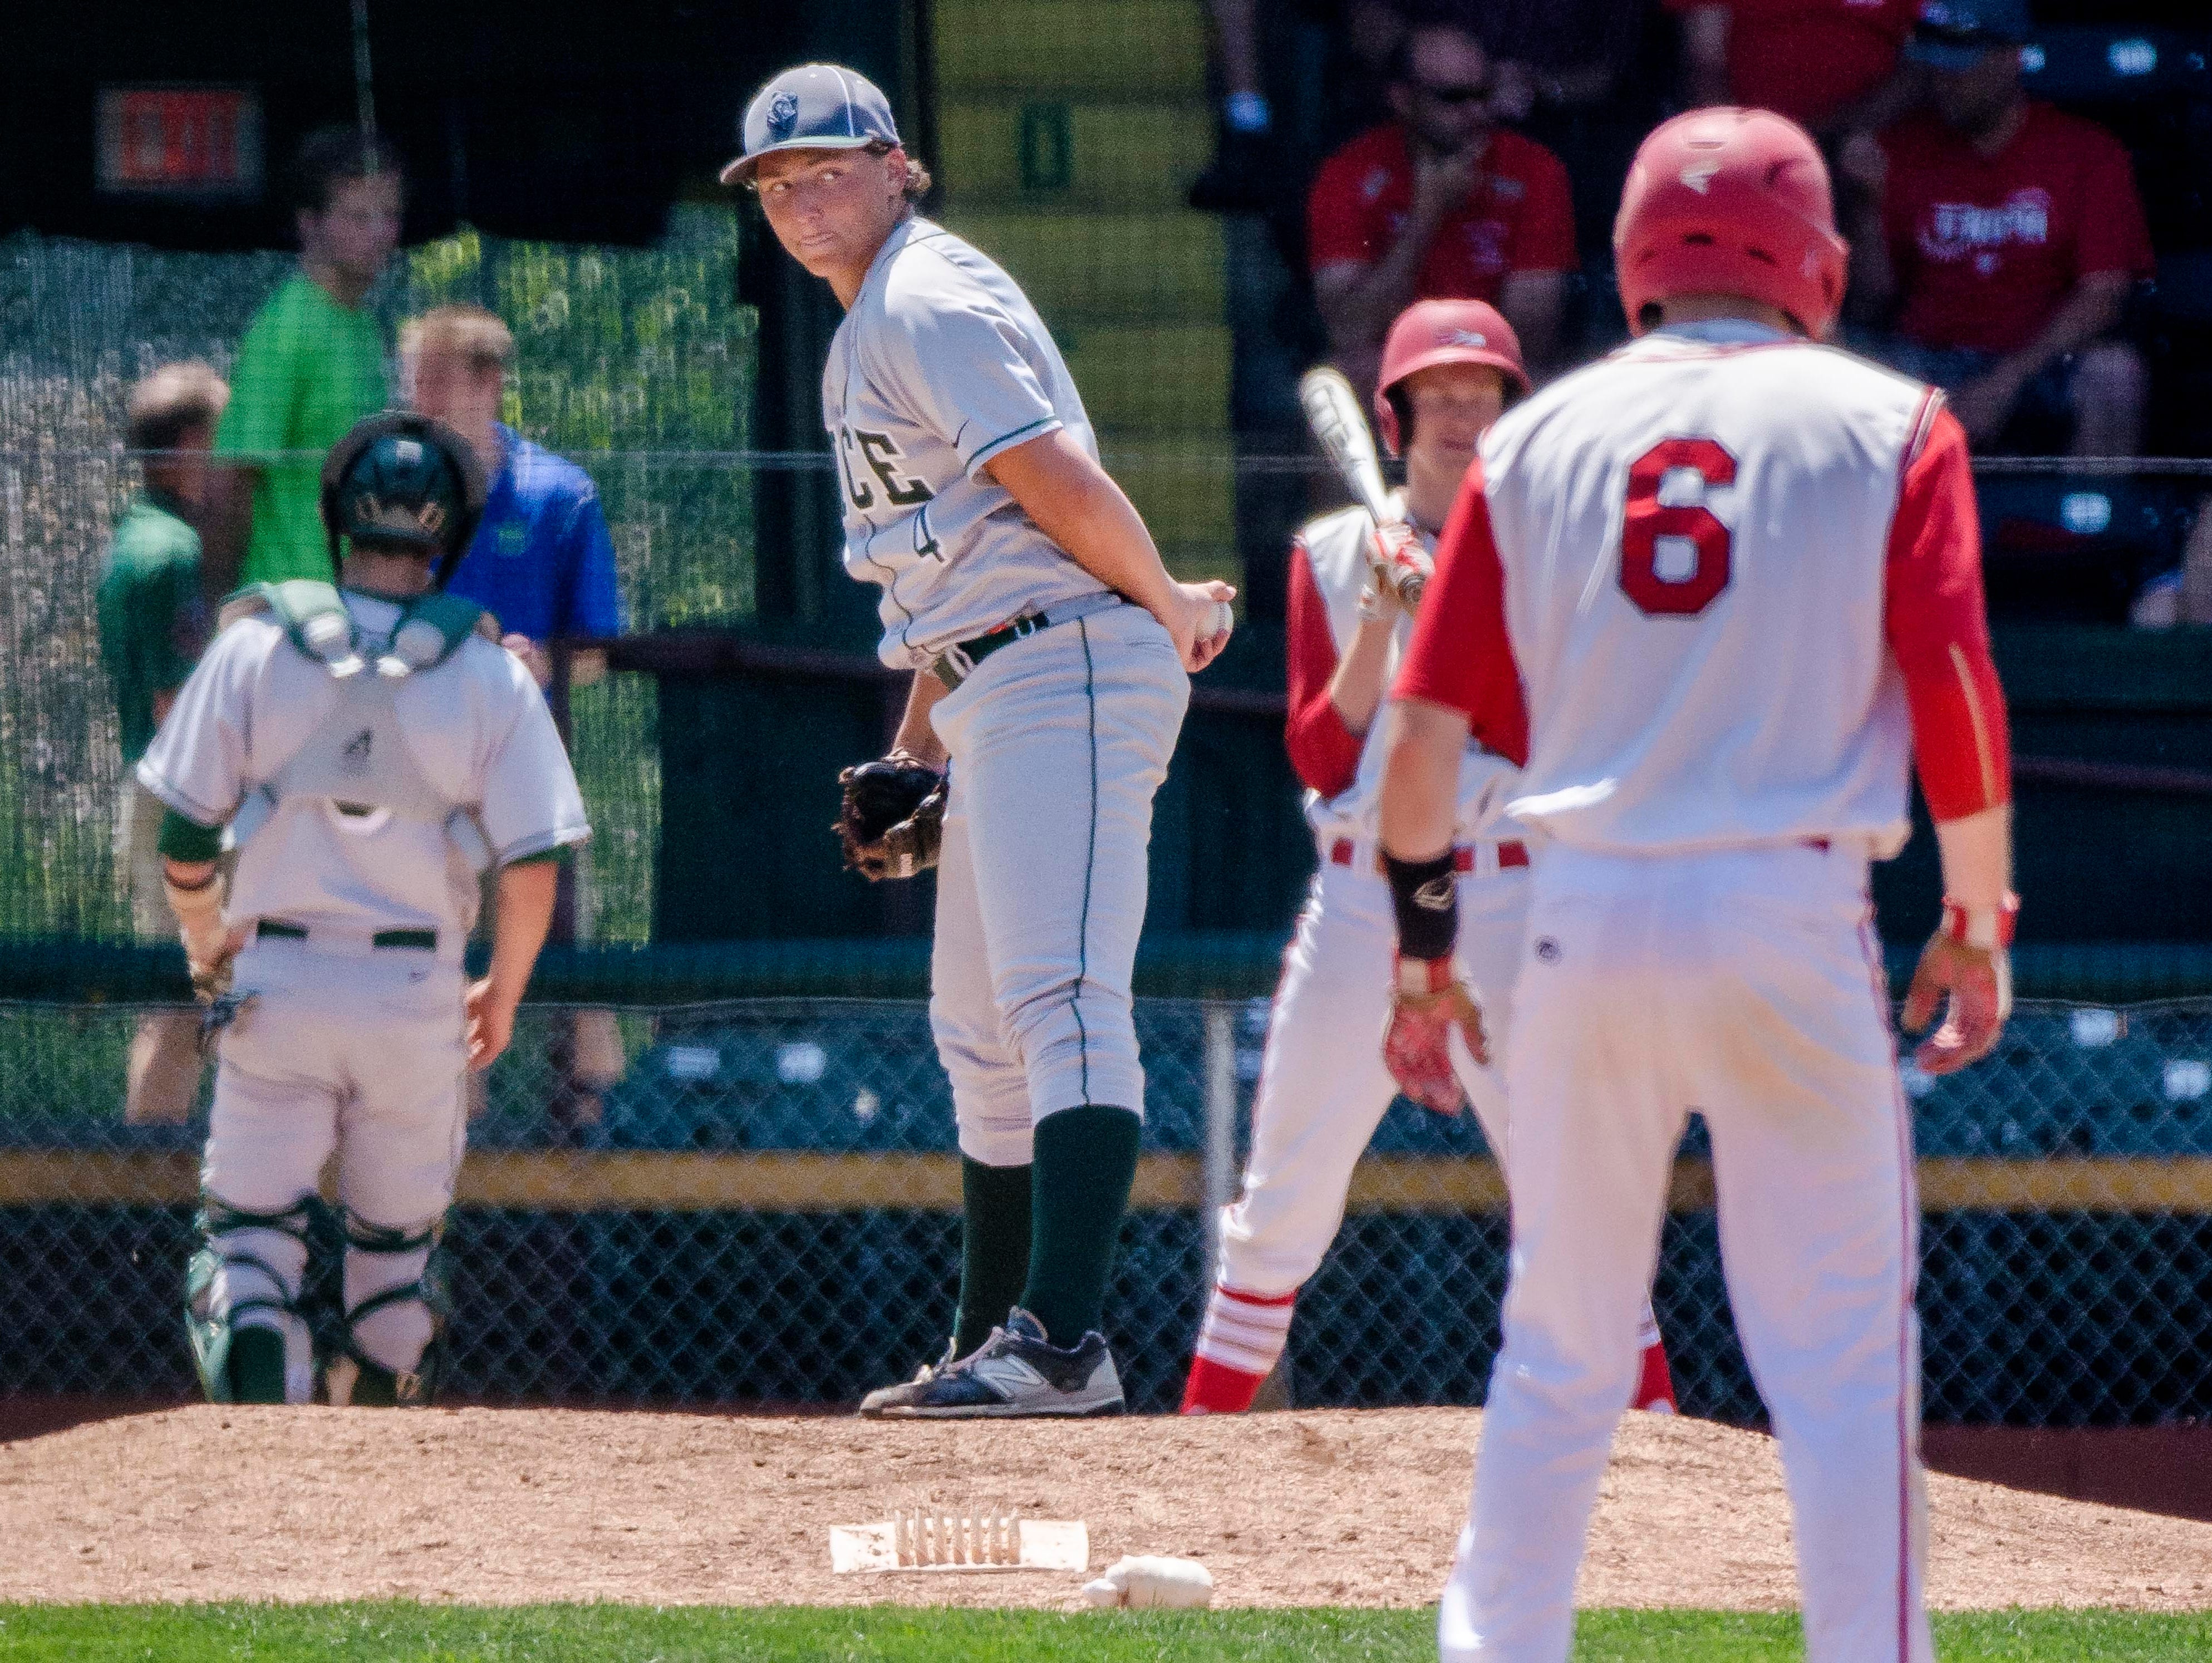 Rice's William Hesslink keeps an eye on the bases against CVU during the Division I state high school baseball championship at Centennial Field in Burlington on Saturday, June 13, 2015.